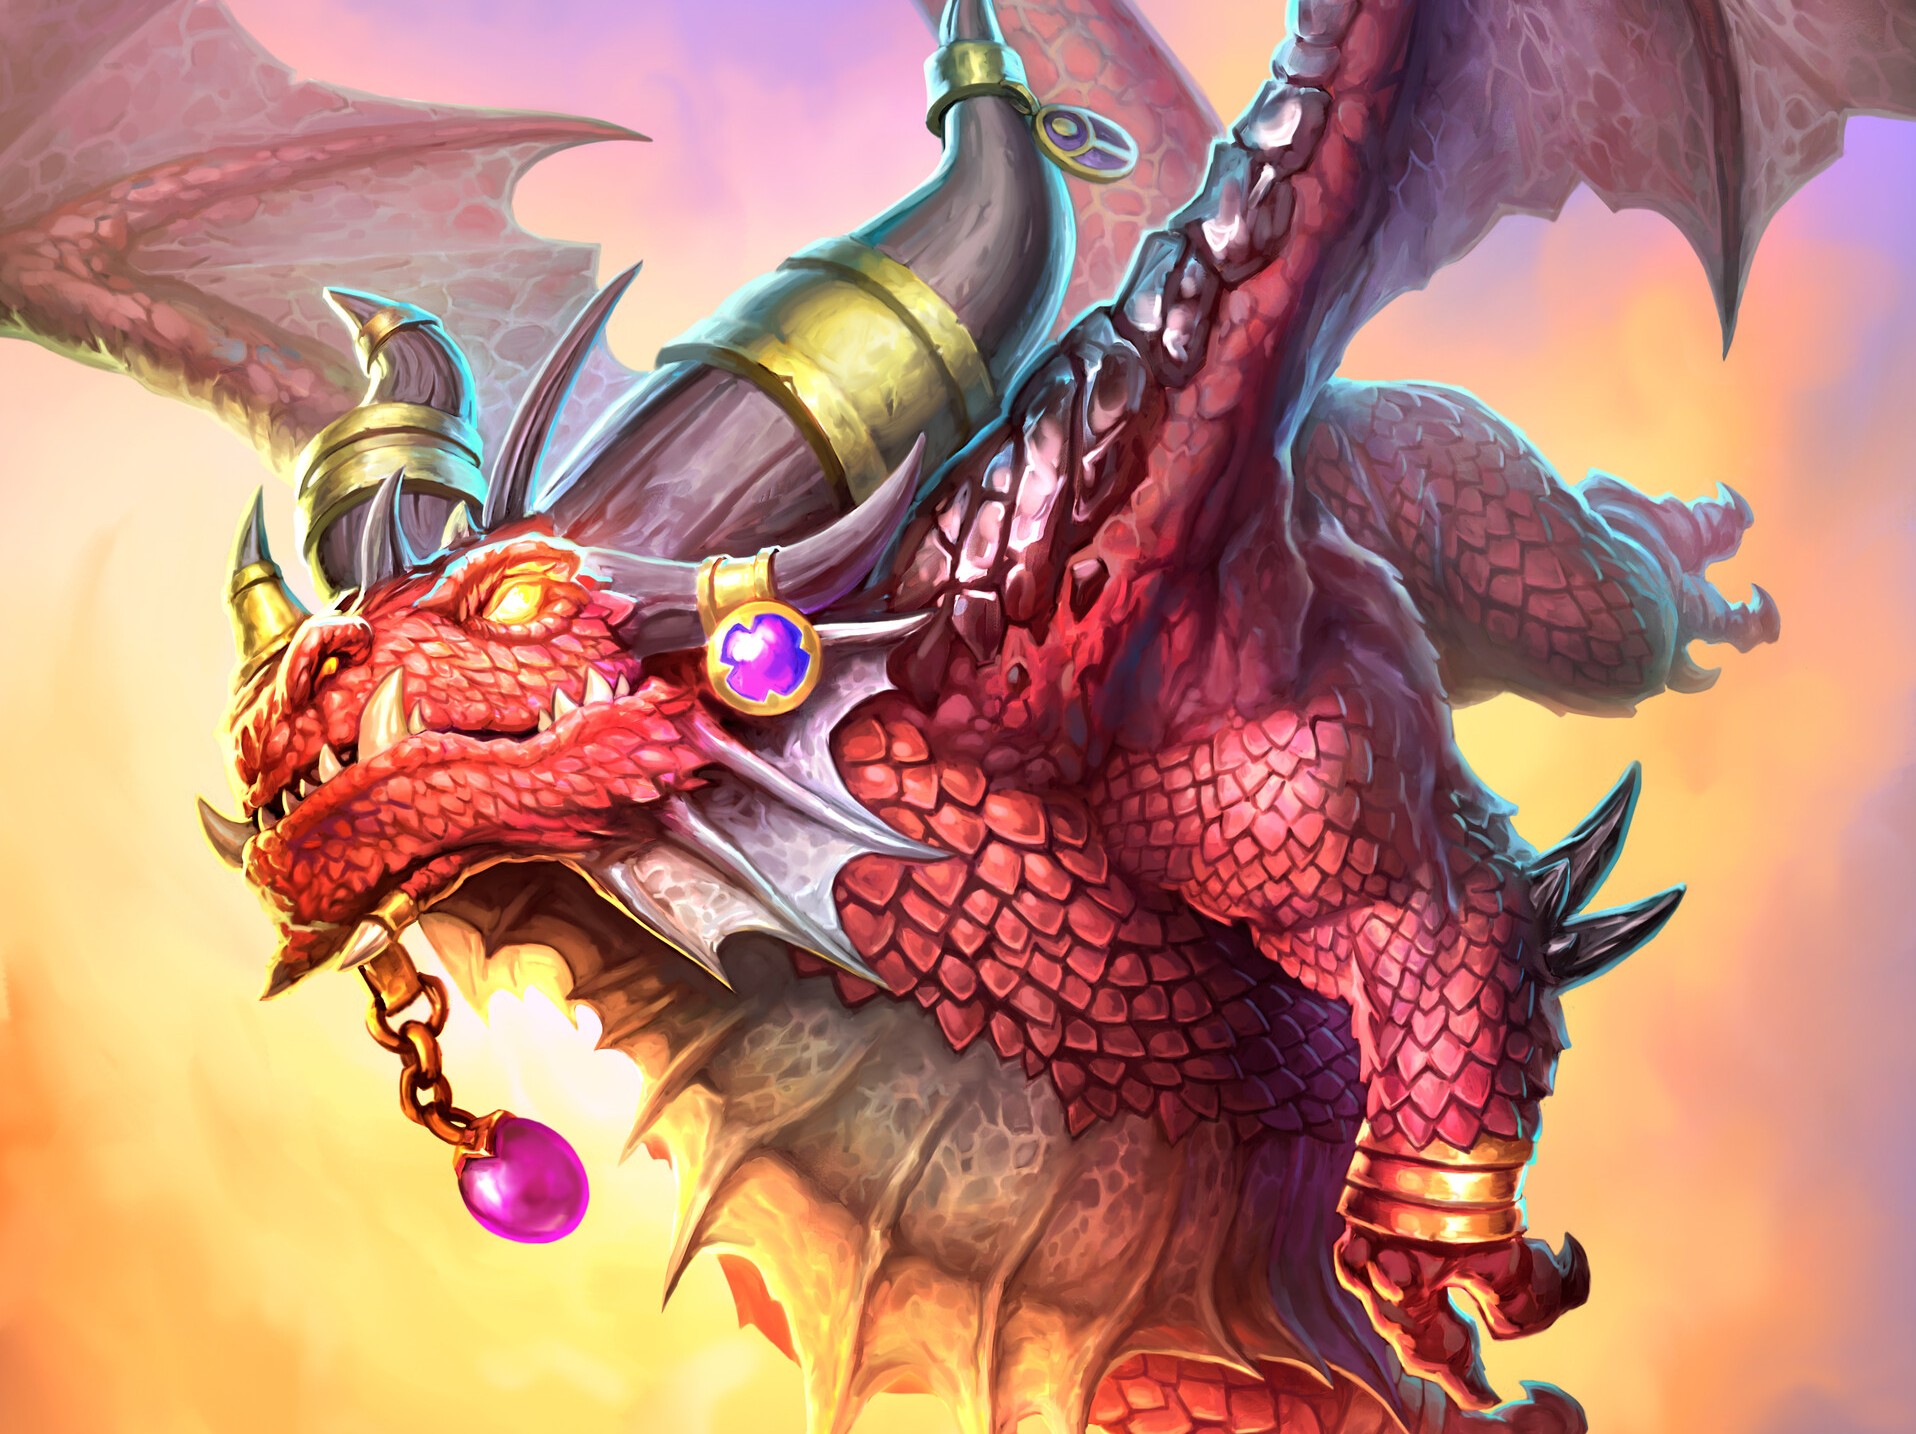  Dragonqueen, Galakrond, and Demon Hunter (again!) hit in the latest wave of Hearthstone nerfs 